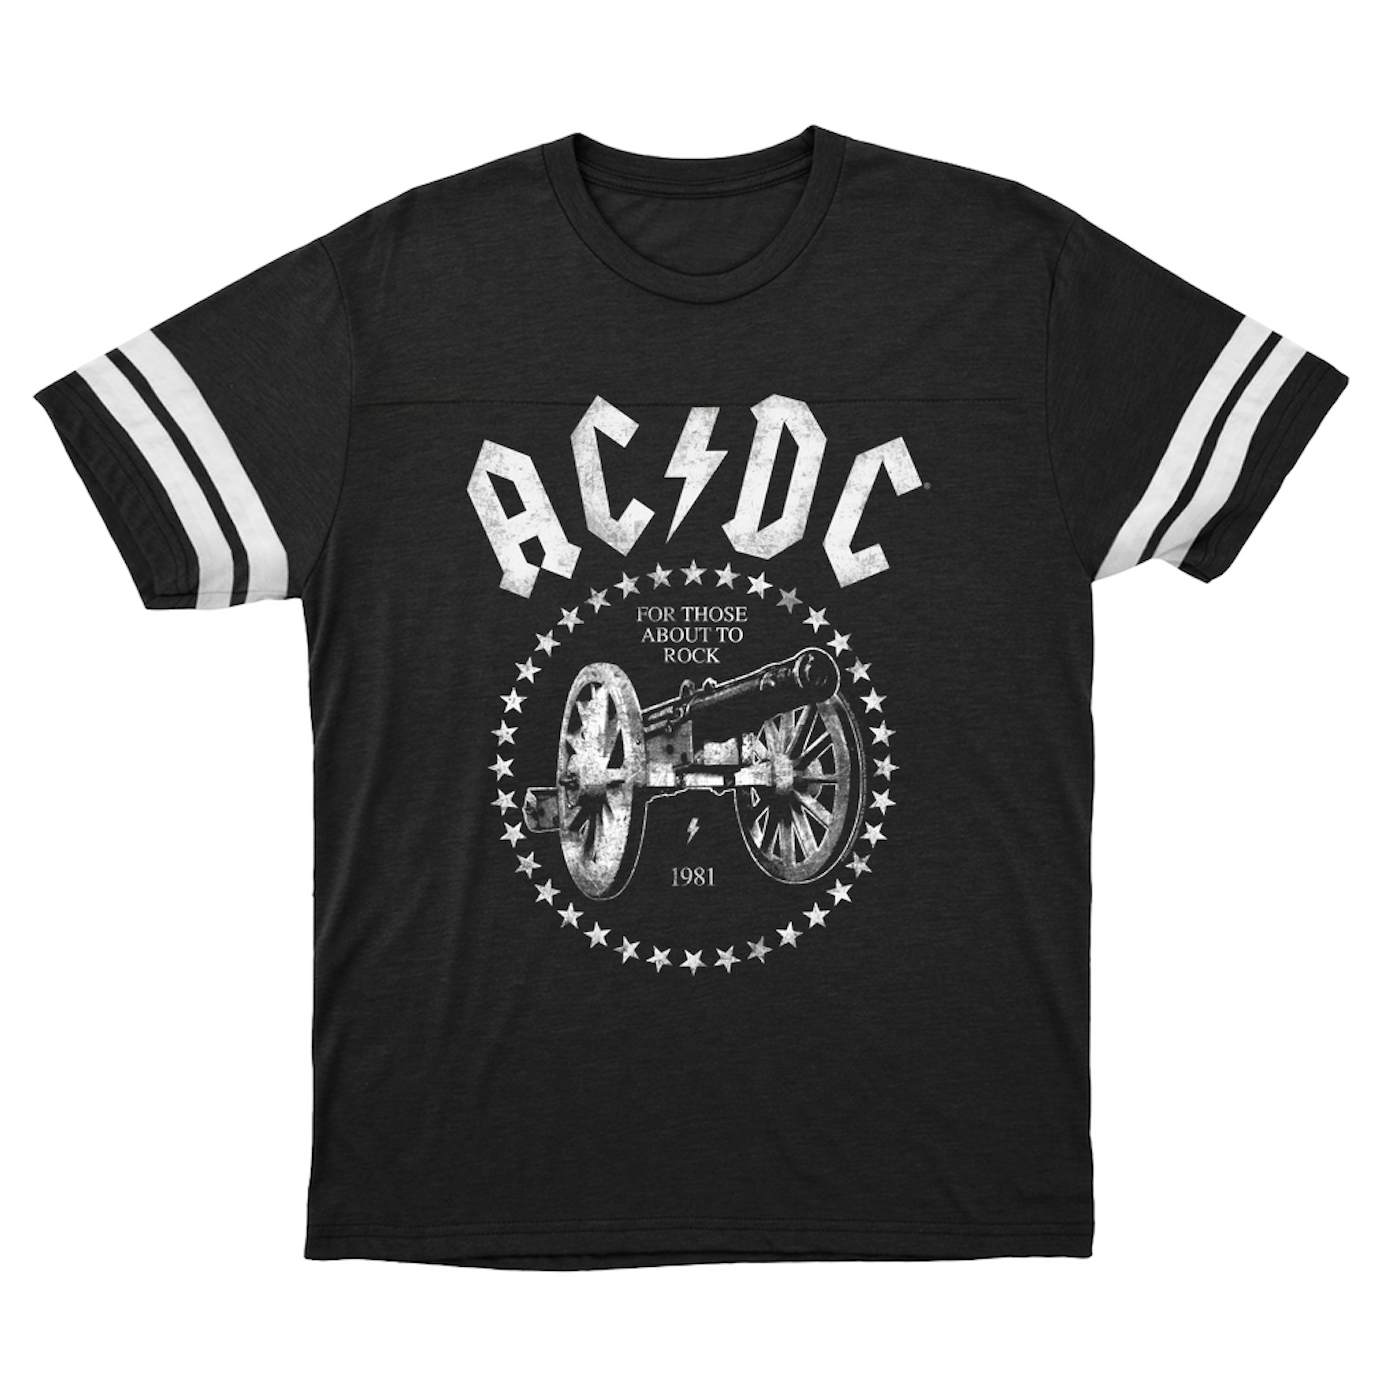 AC/DC T-Shirt | For Those About To Rock 1981 (Merchbar Exclusive) ACDC Football Shirt